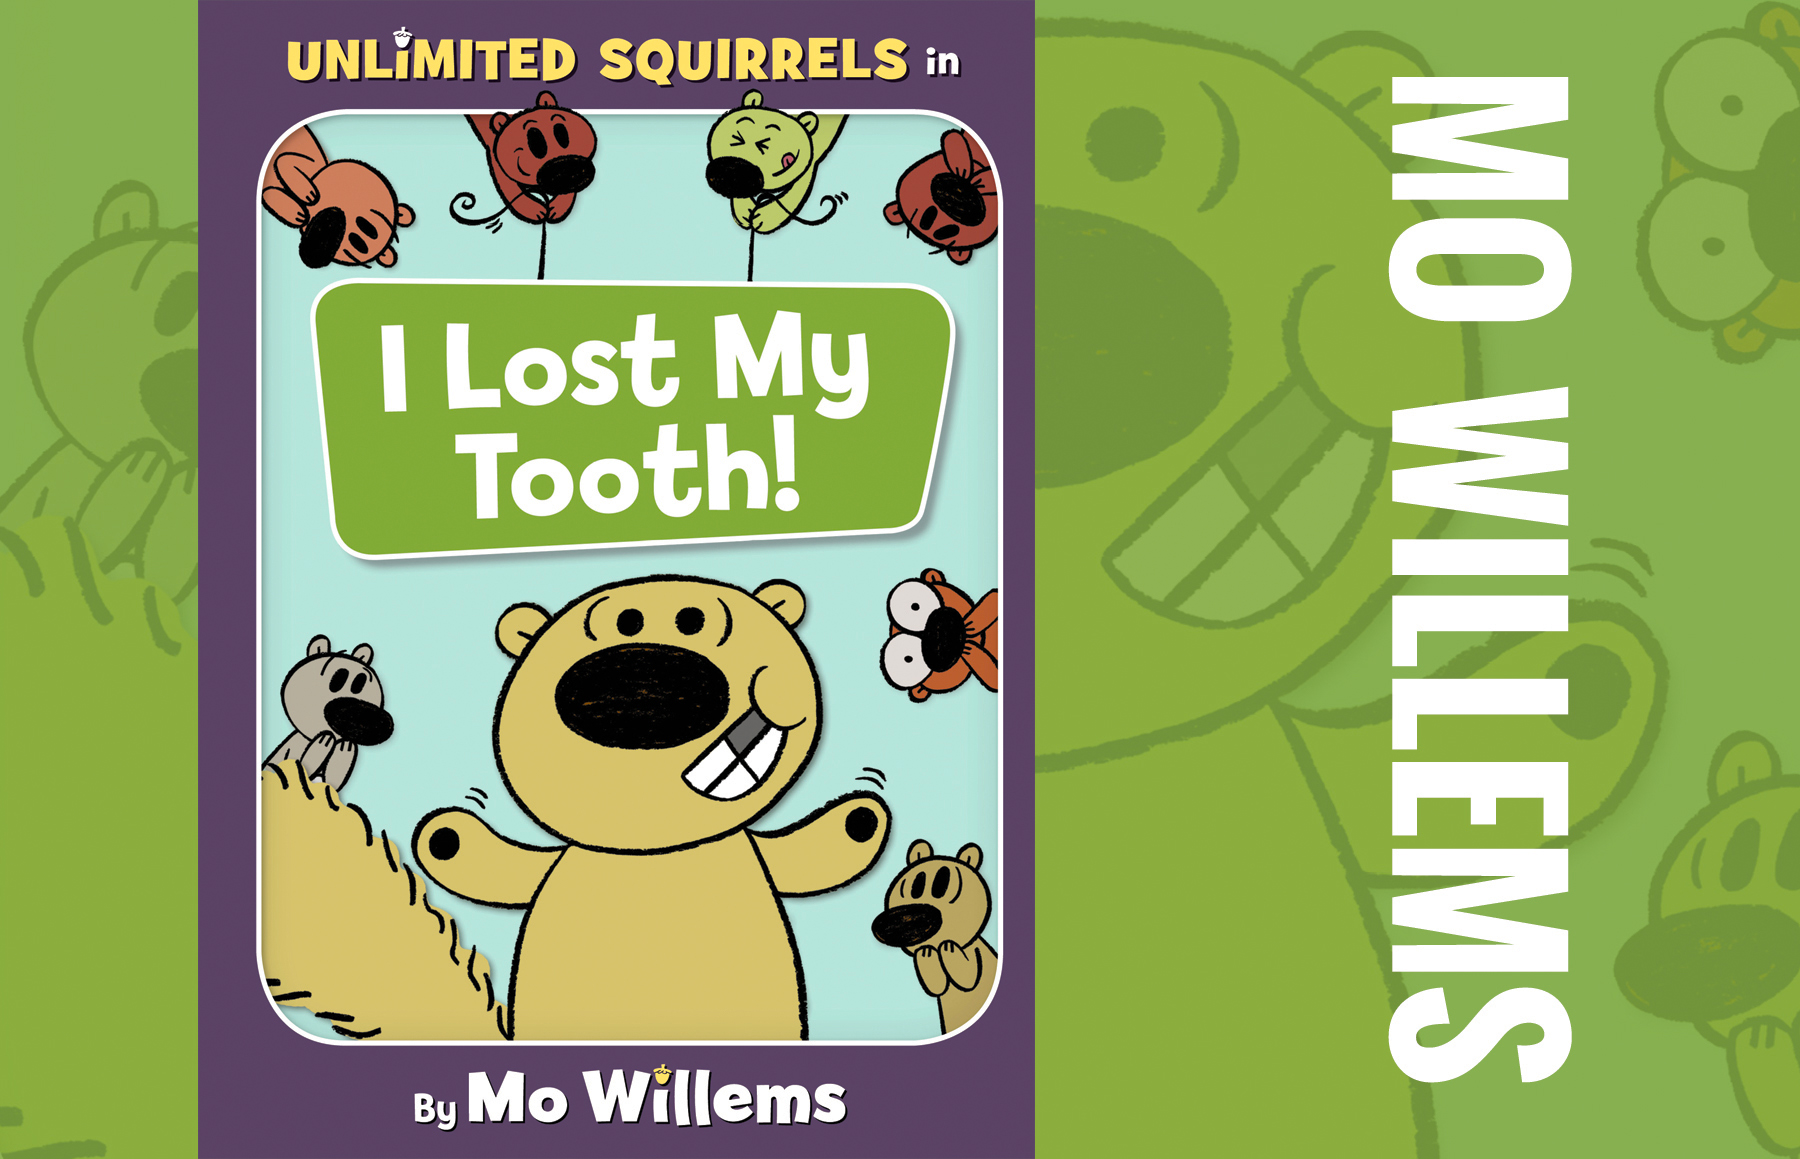 Disney Publishing Worldwide Announces New Children’s Series Unlimited Squirrels With Best-selling Author Mo Willems